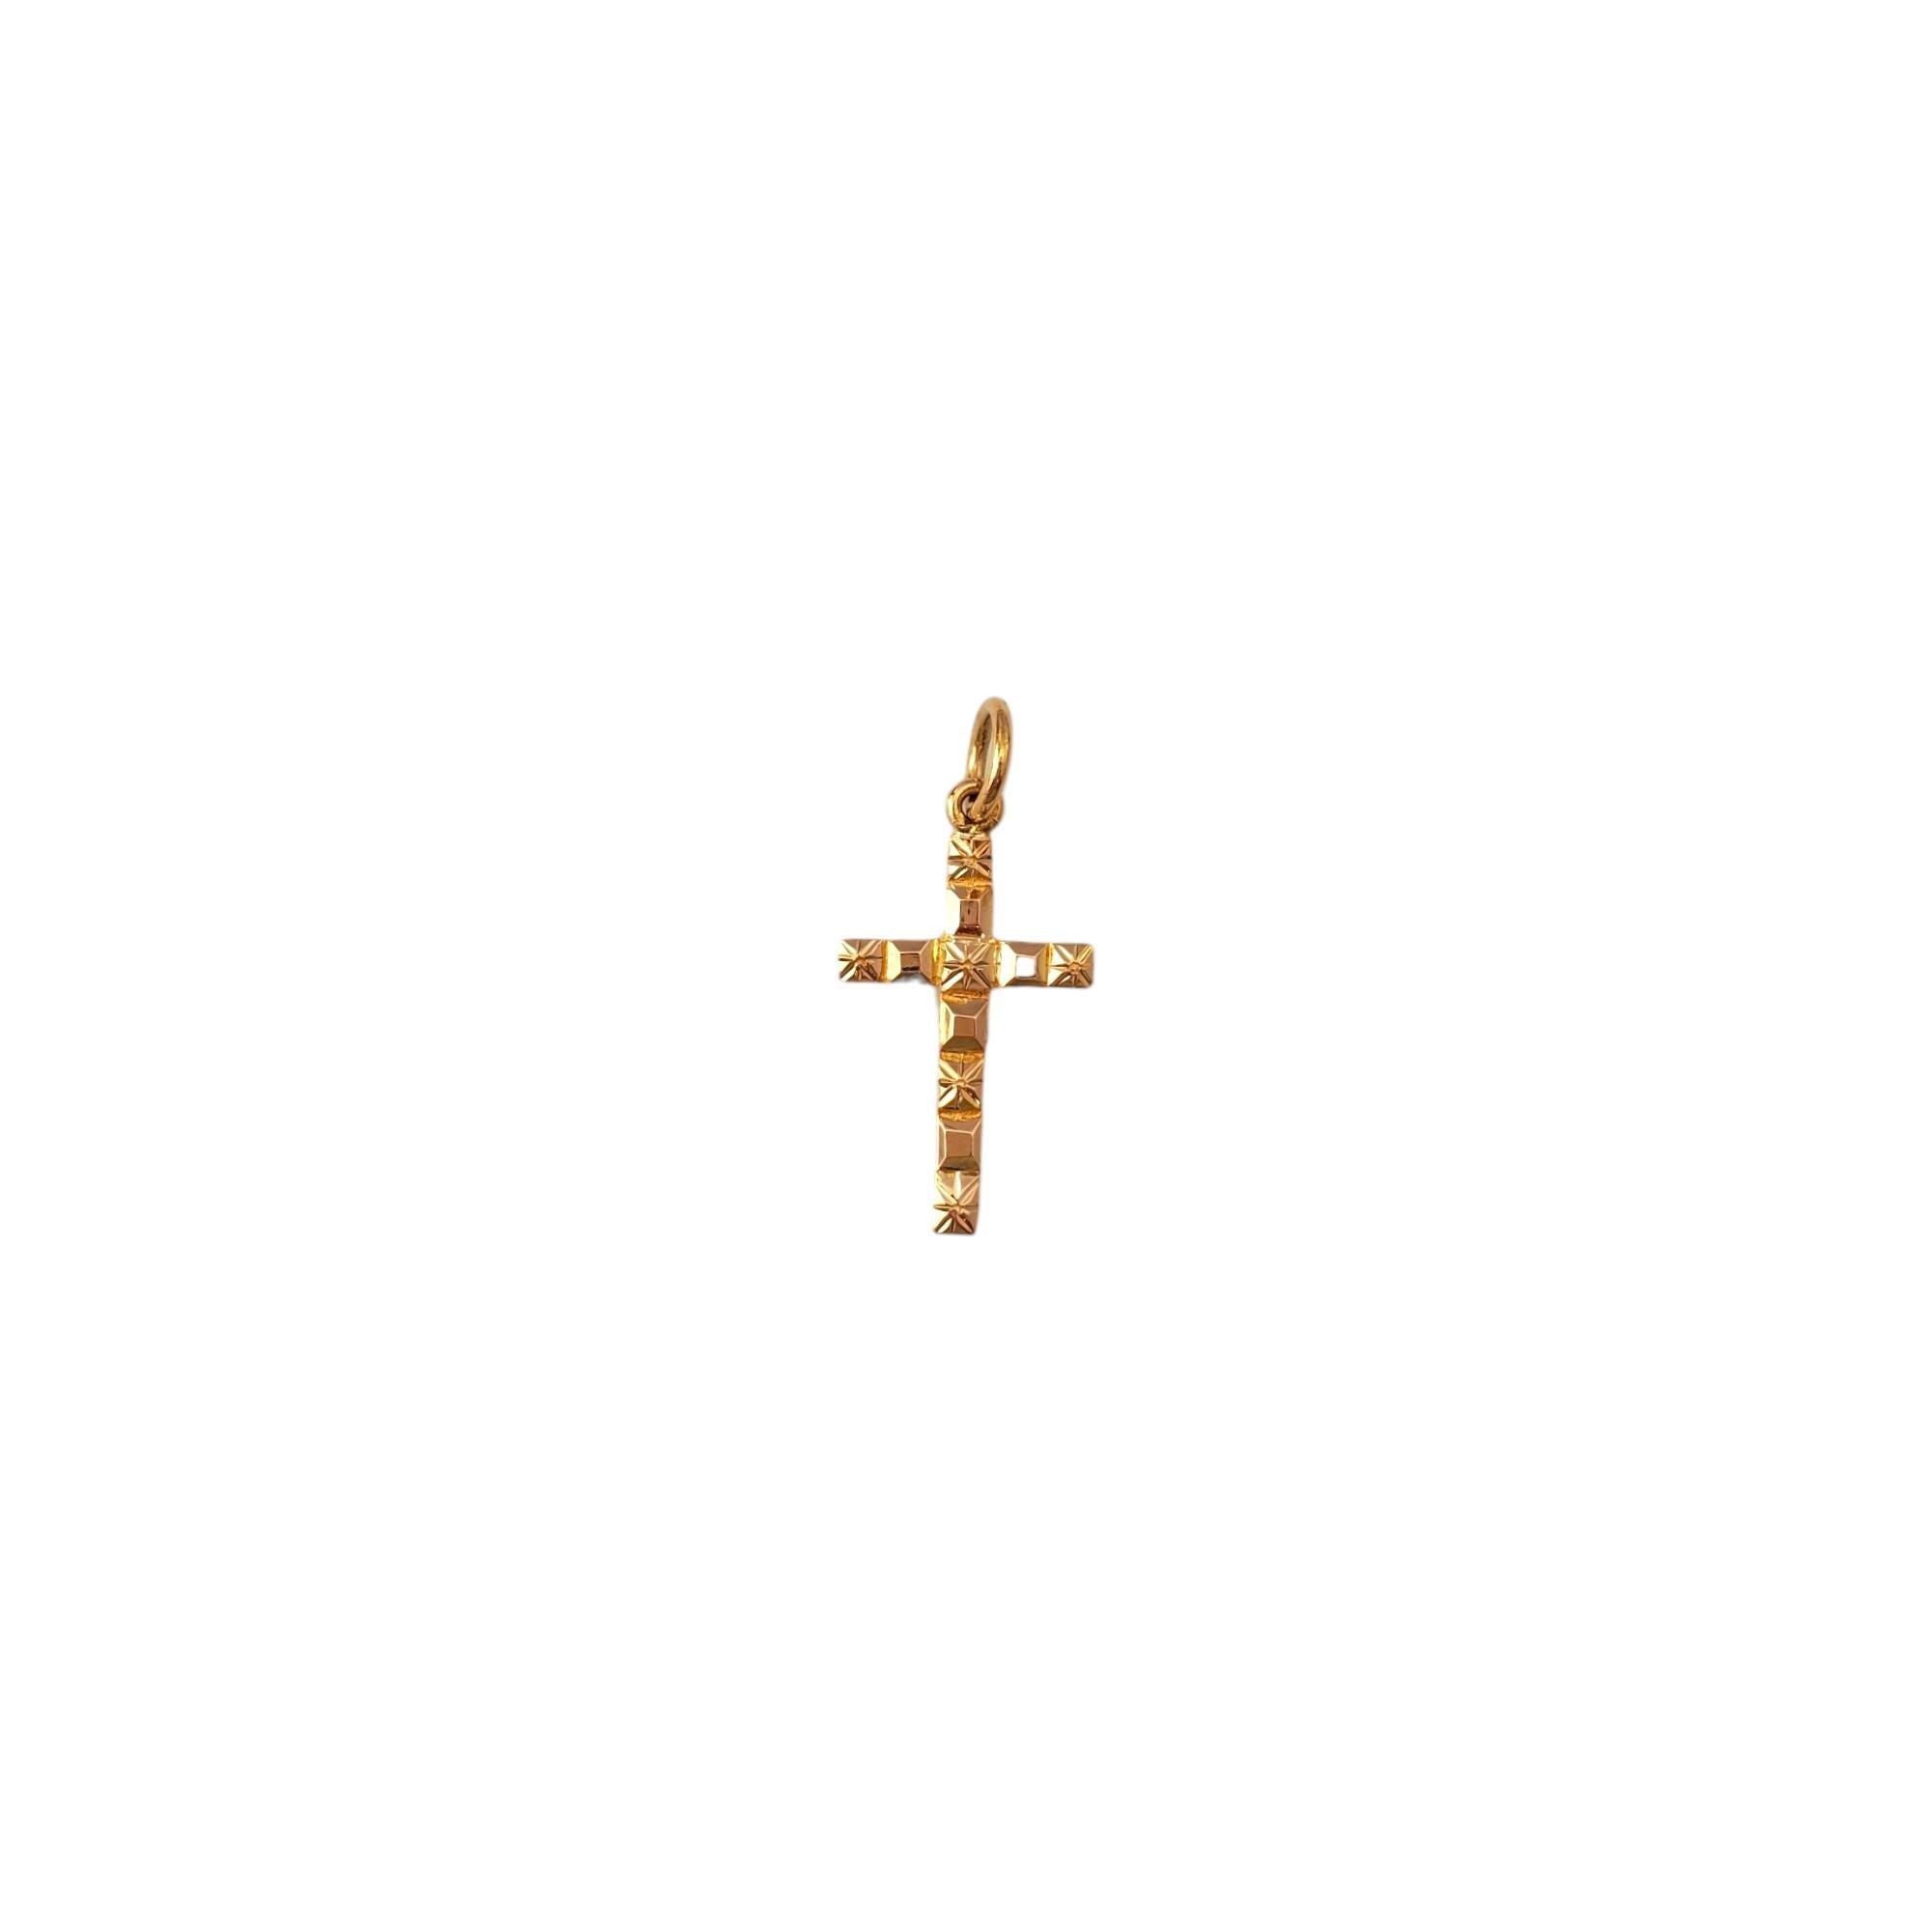 18K Yellow Gold Cross Pendant 

This cross pendant is a symbol of faith and is a meaningful addition to your collection. 

Size: 24.5mm X 14.4mm X 1.4mm

Weight: 1.1dwt. / 1.6 gr.

Tested 18K

Very good condition, professionally polished.

Will come